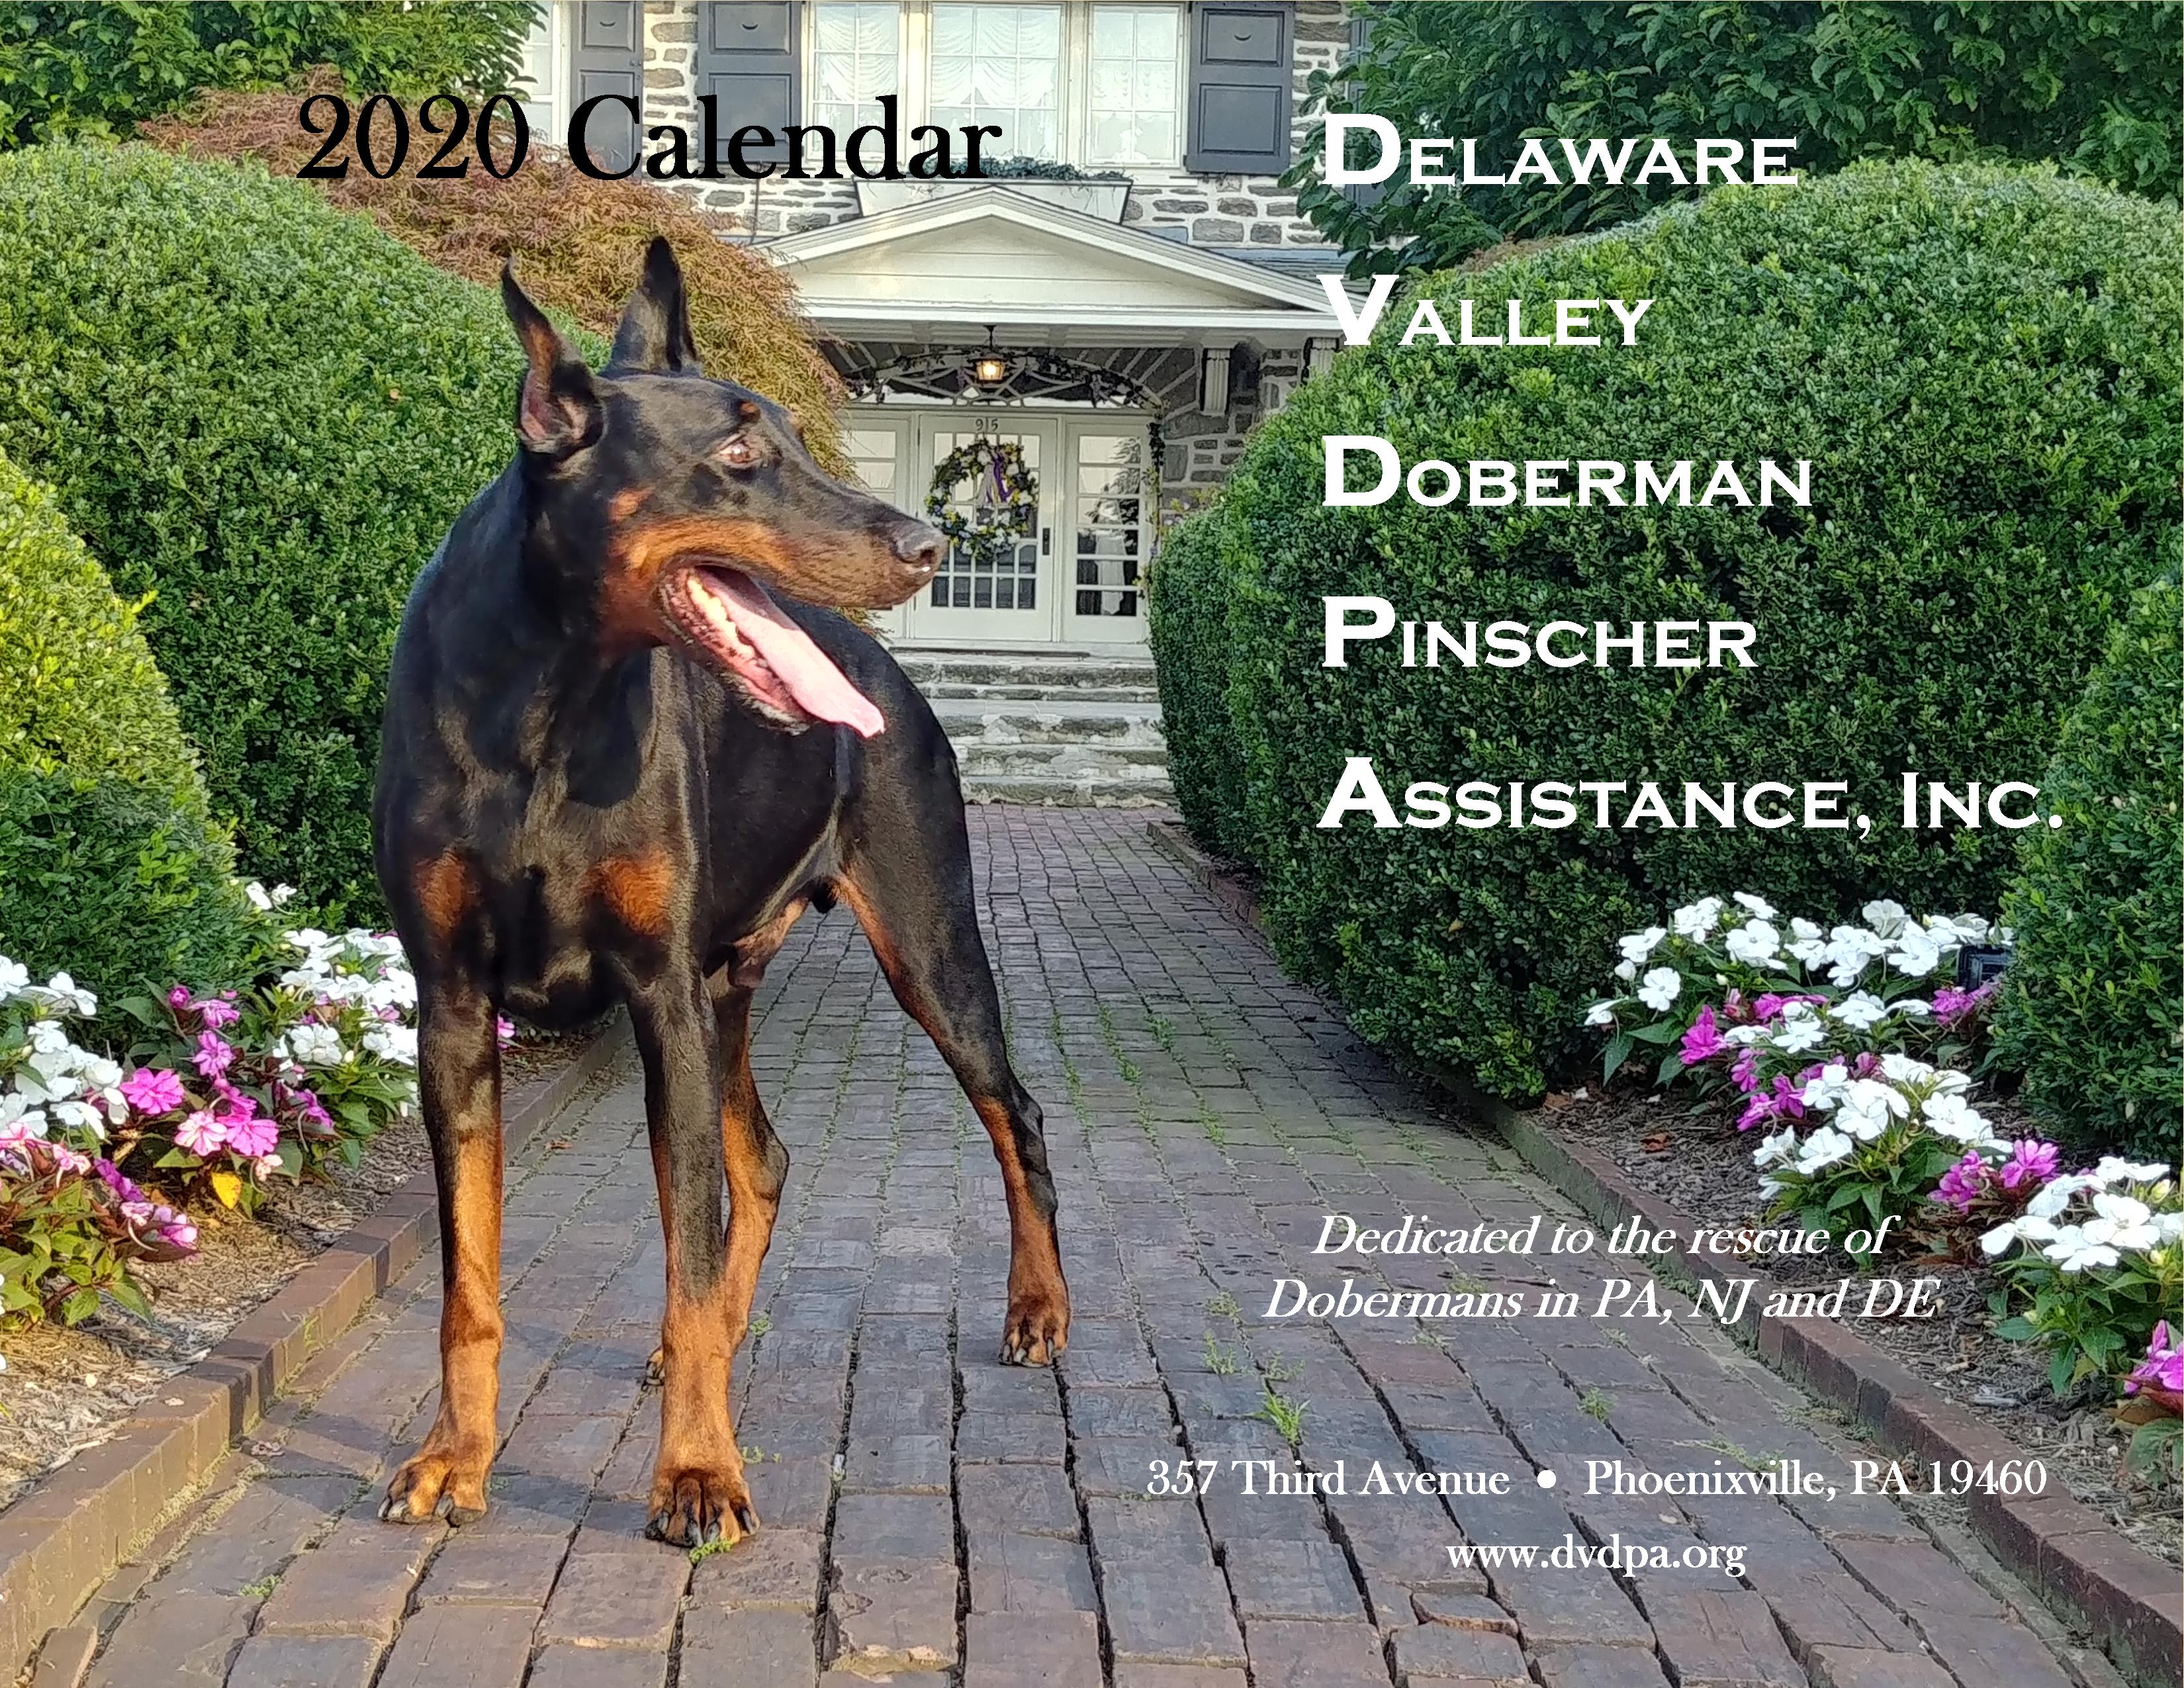 Delaware Valley Doberman Pinscher Assistance – Dedicated to the rescue